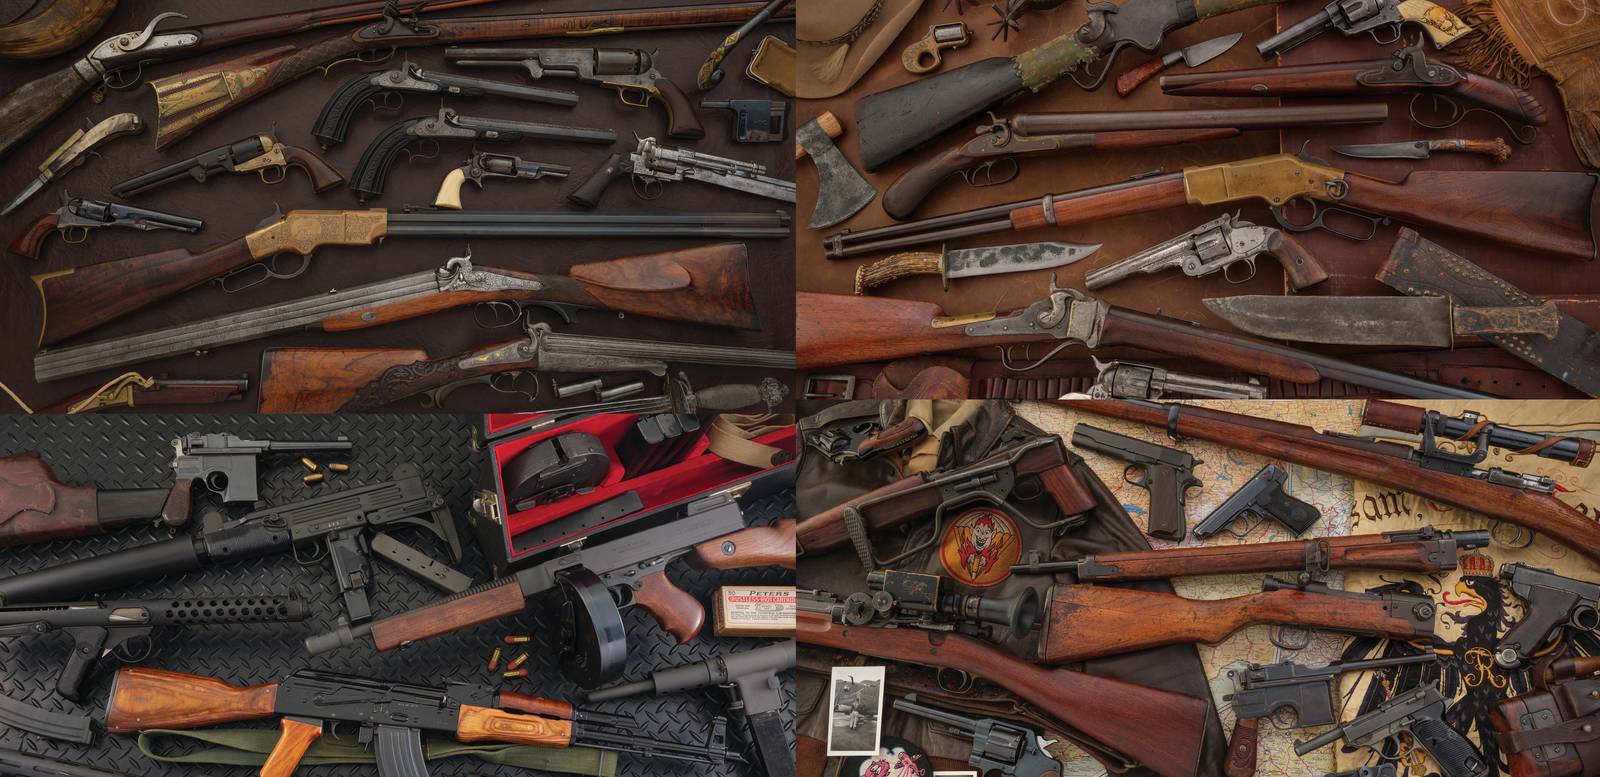 June 21, 22 & 23 Sporting & Collector Firearms Auction - Nearly 4500 Firearms!